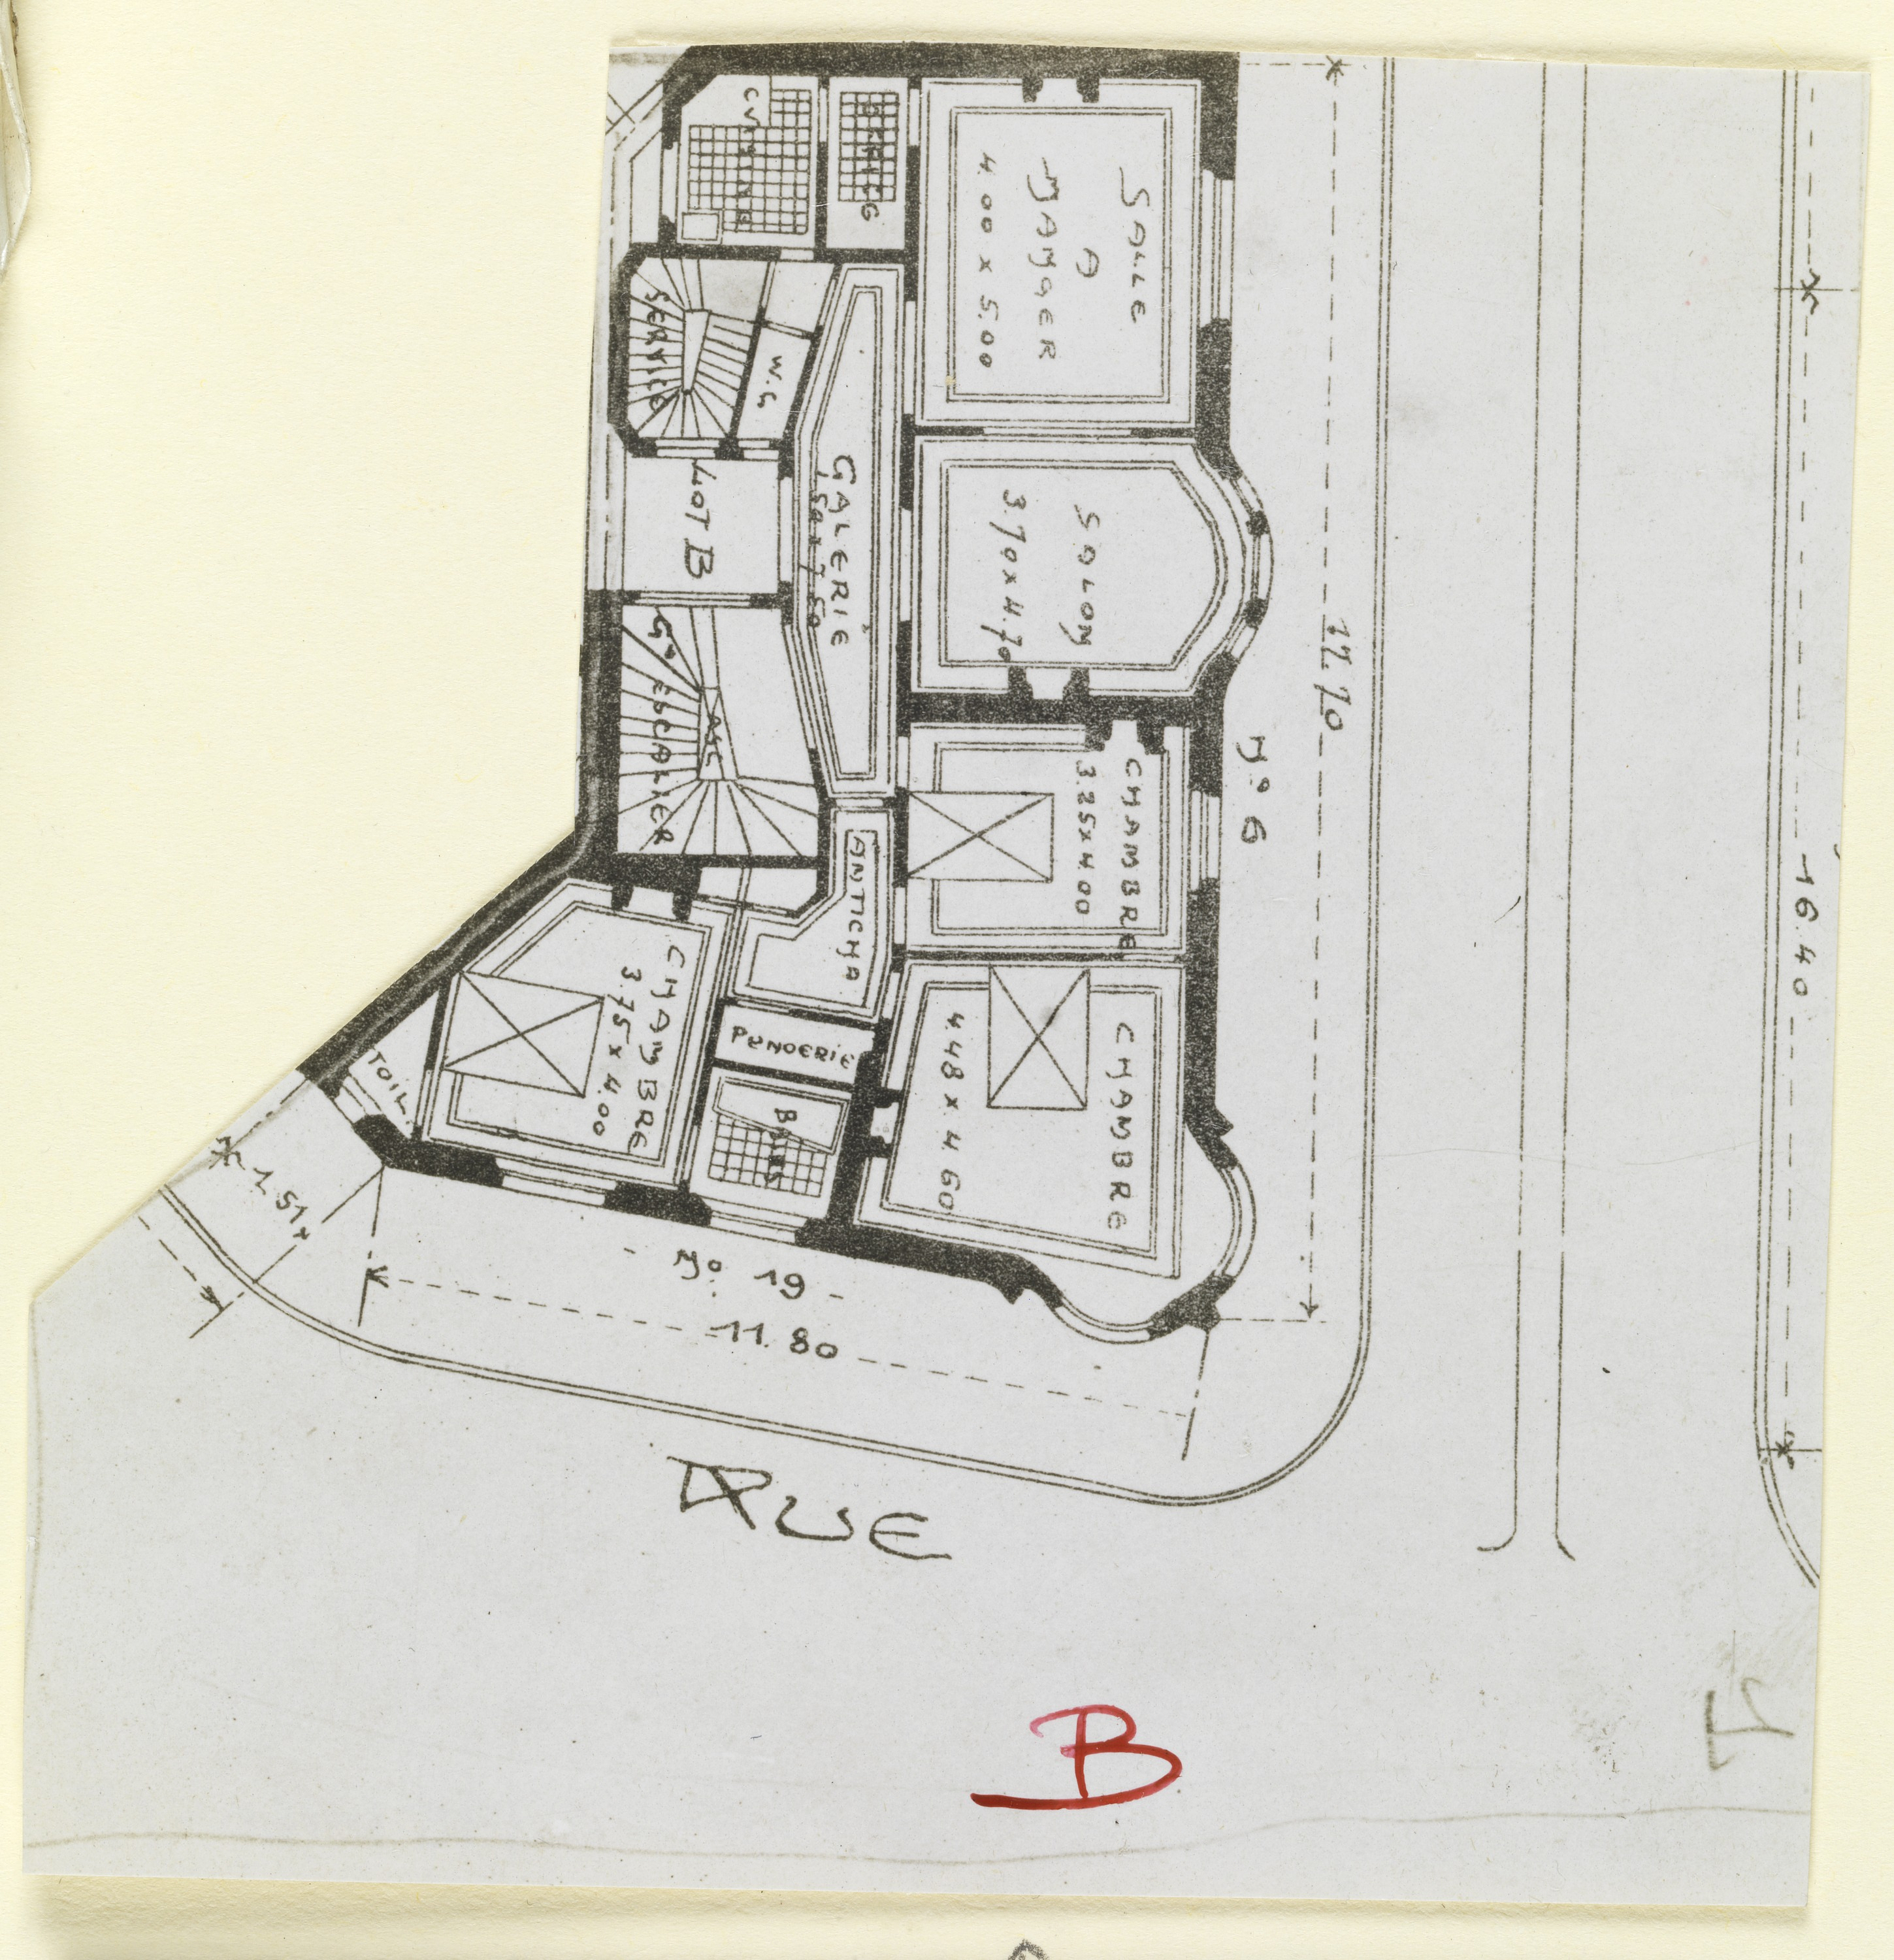 File Photograph Photograph Of A Floor Plan Of An Apartment